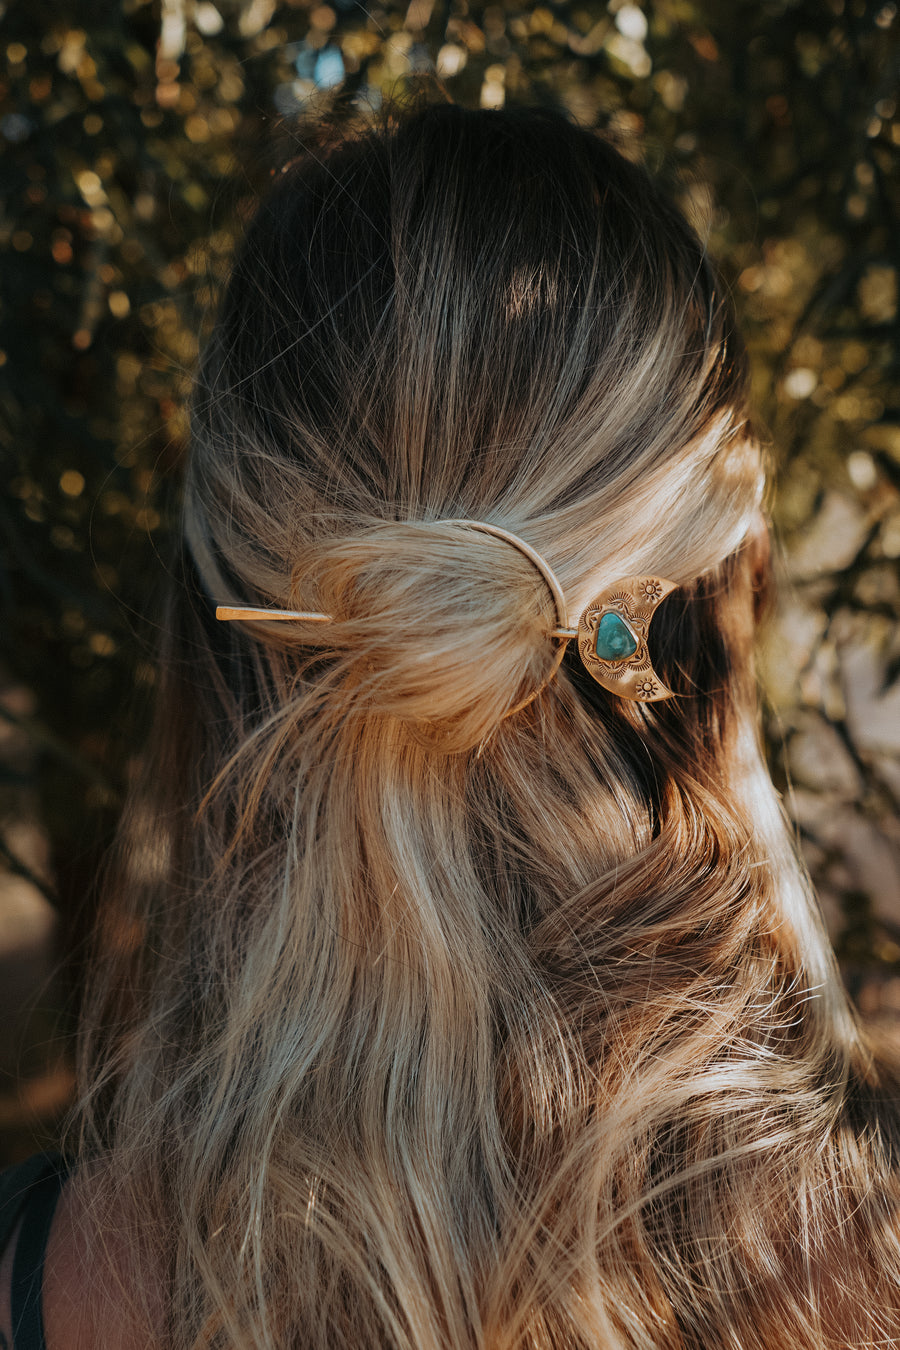 The Wanderer Hairpin in Sonoran Blue Turquoise